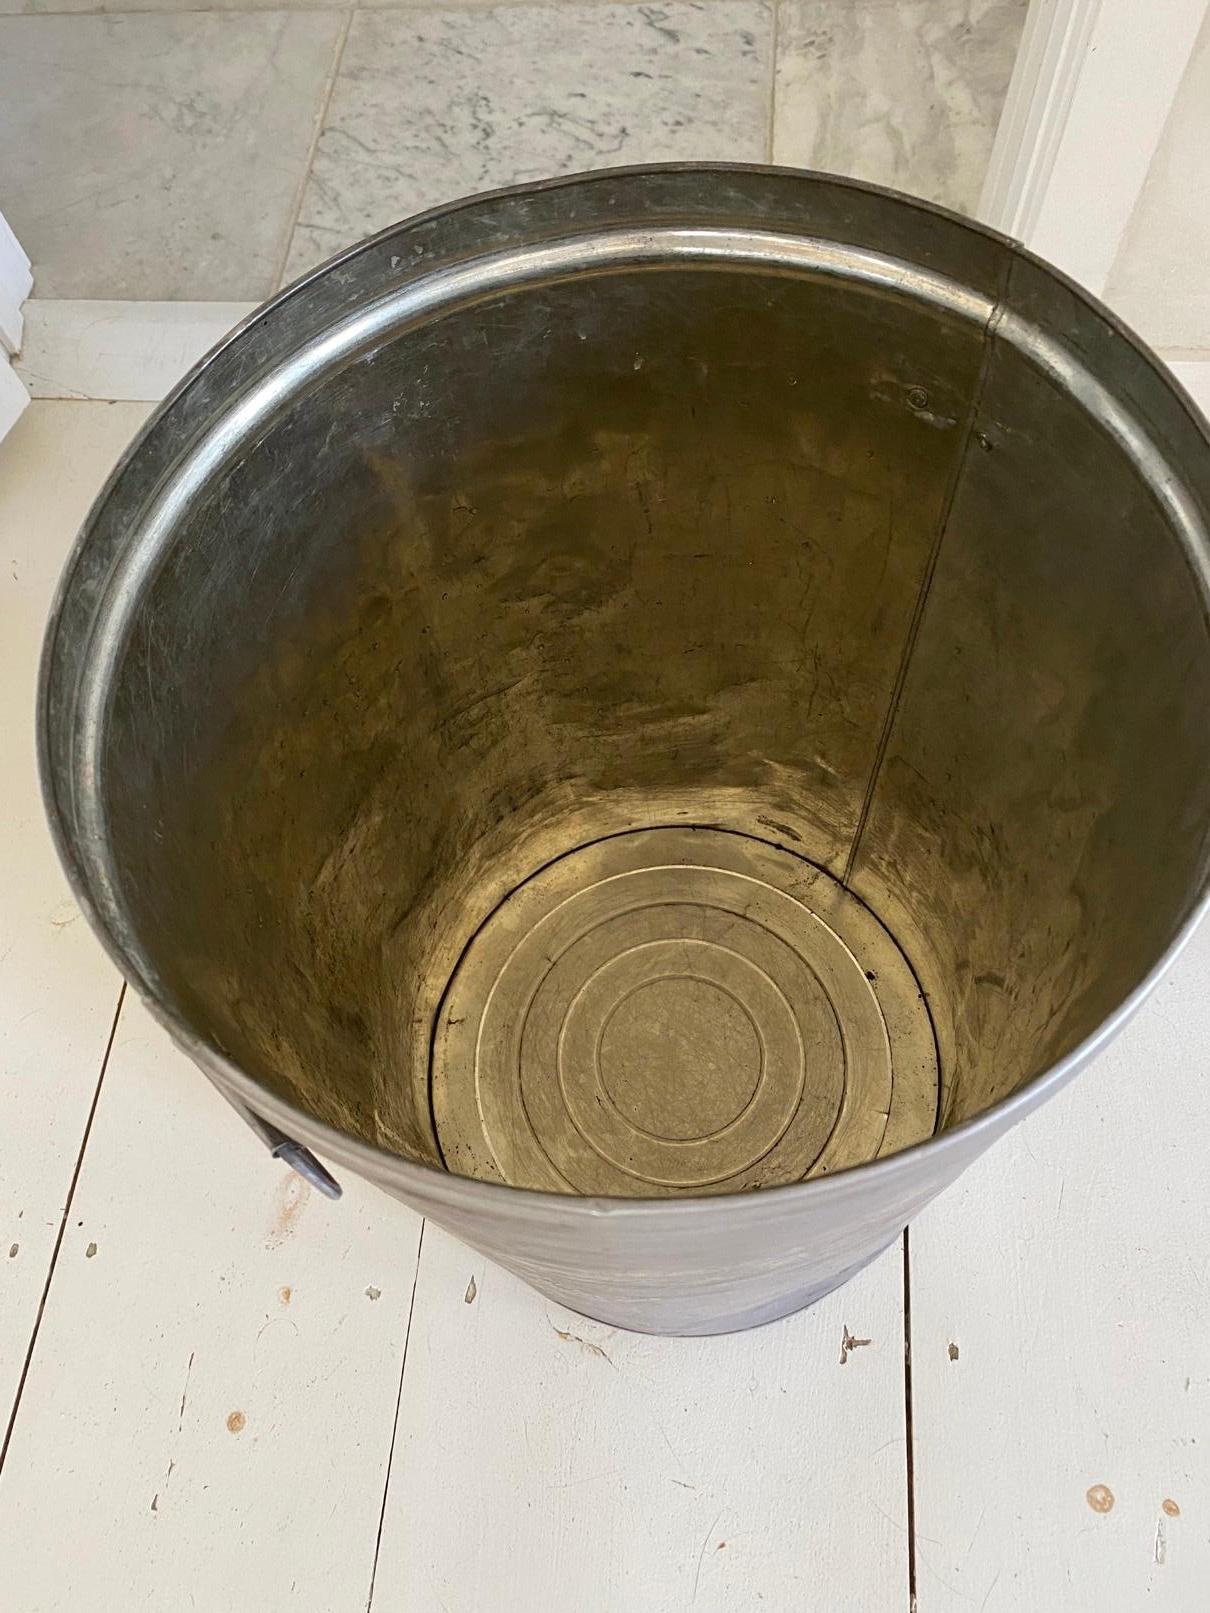 Rustic vintage iron grain storage vessel with a distressed pewter finish, aged patina and is a great industrial piece perfect for adding a little rustic farmhouse charm to any space. This galvanized metal bin is a perfect choice for adding interest